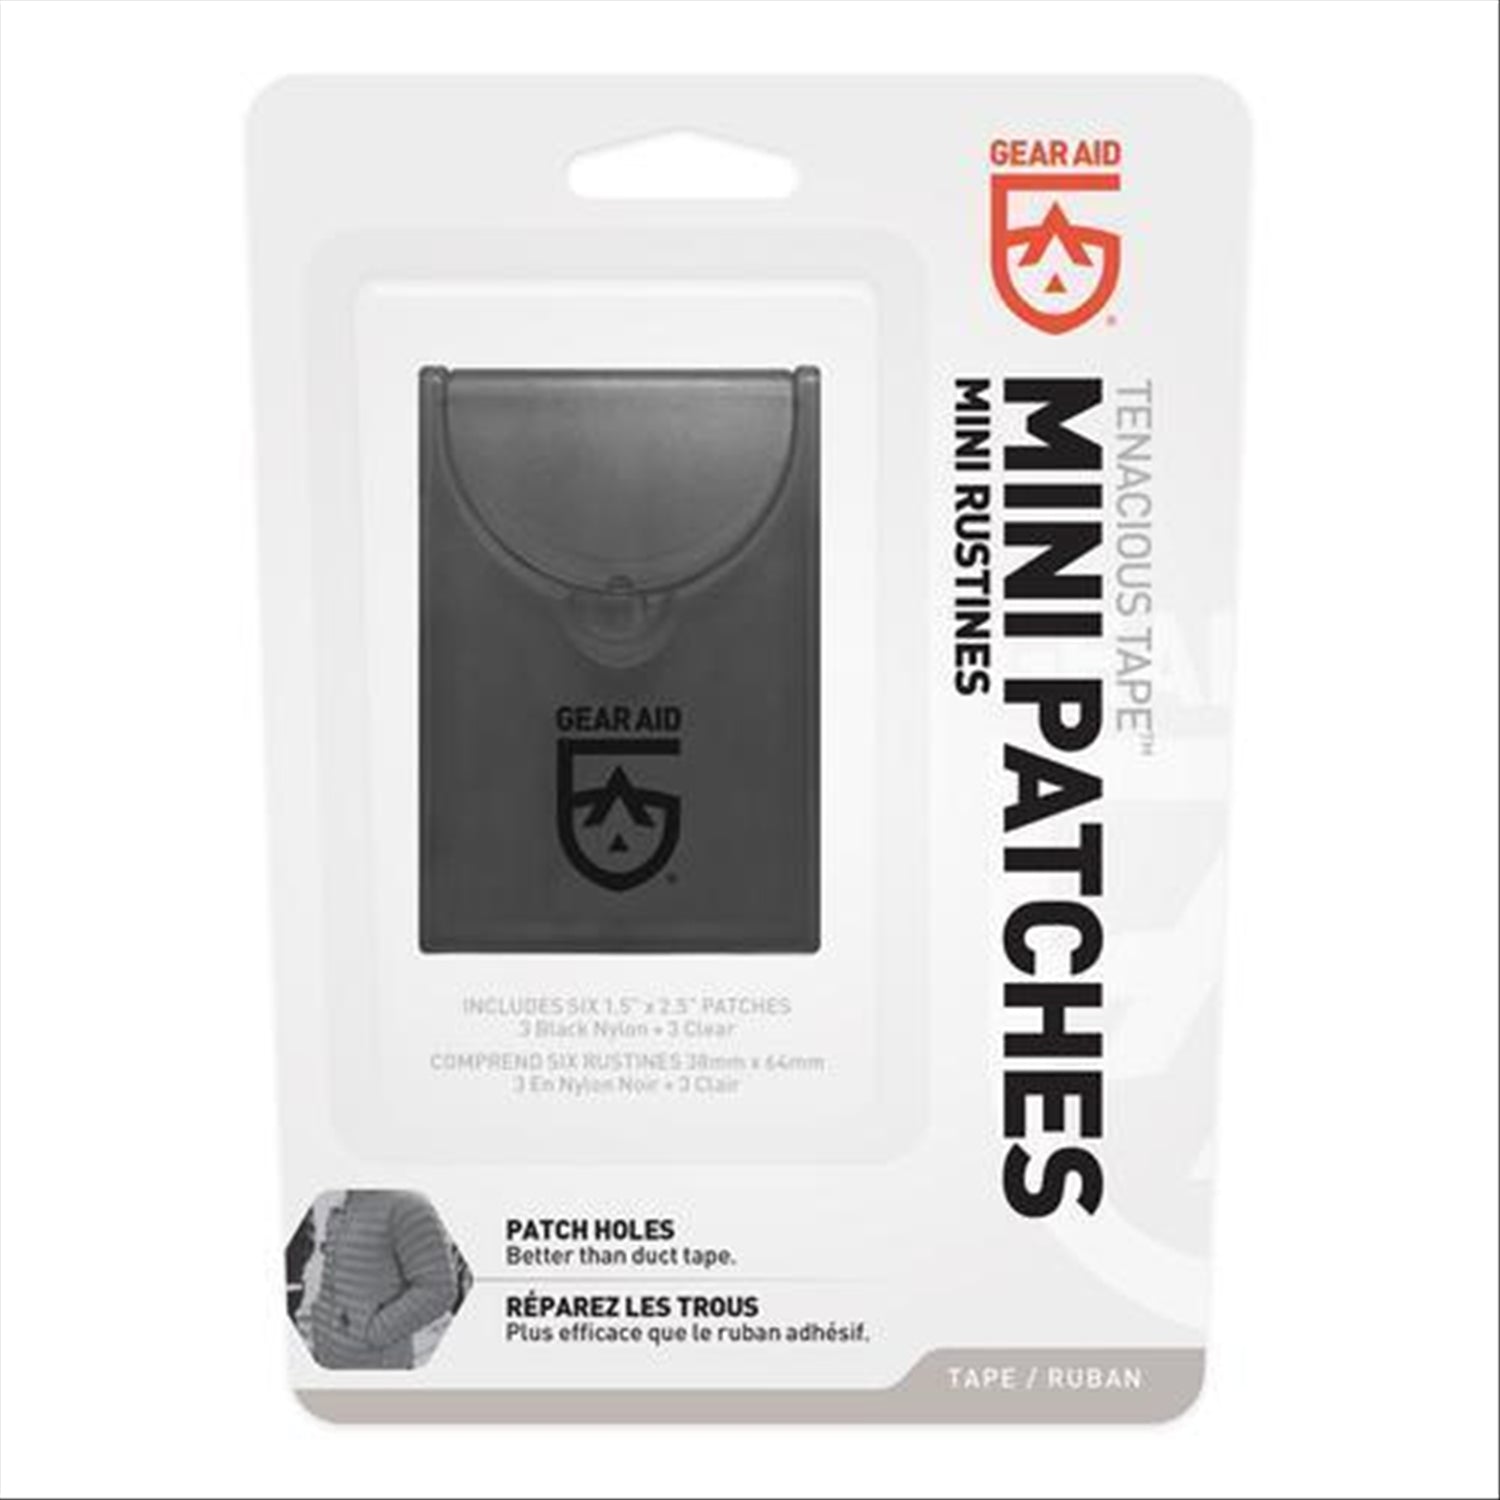 Gear Aid Tenacious Tape Mini Patches For Quick Fabric Repairs